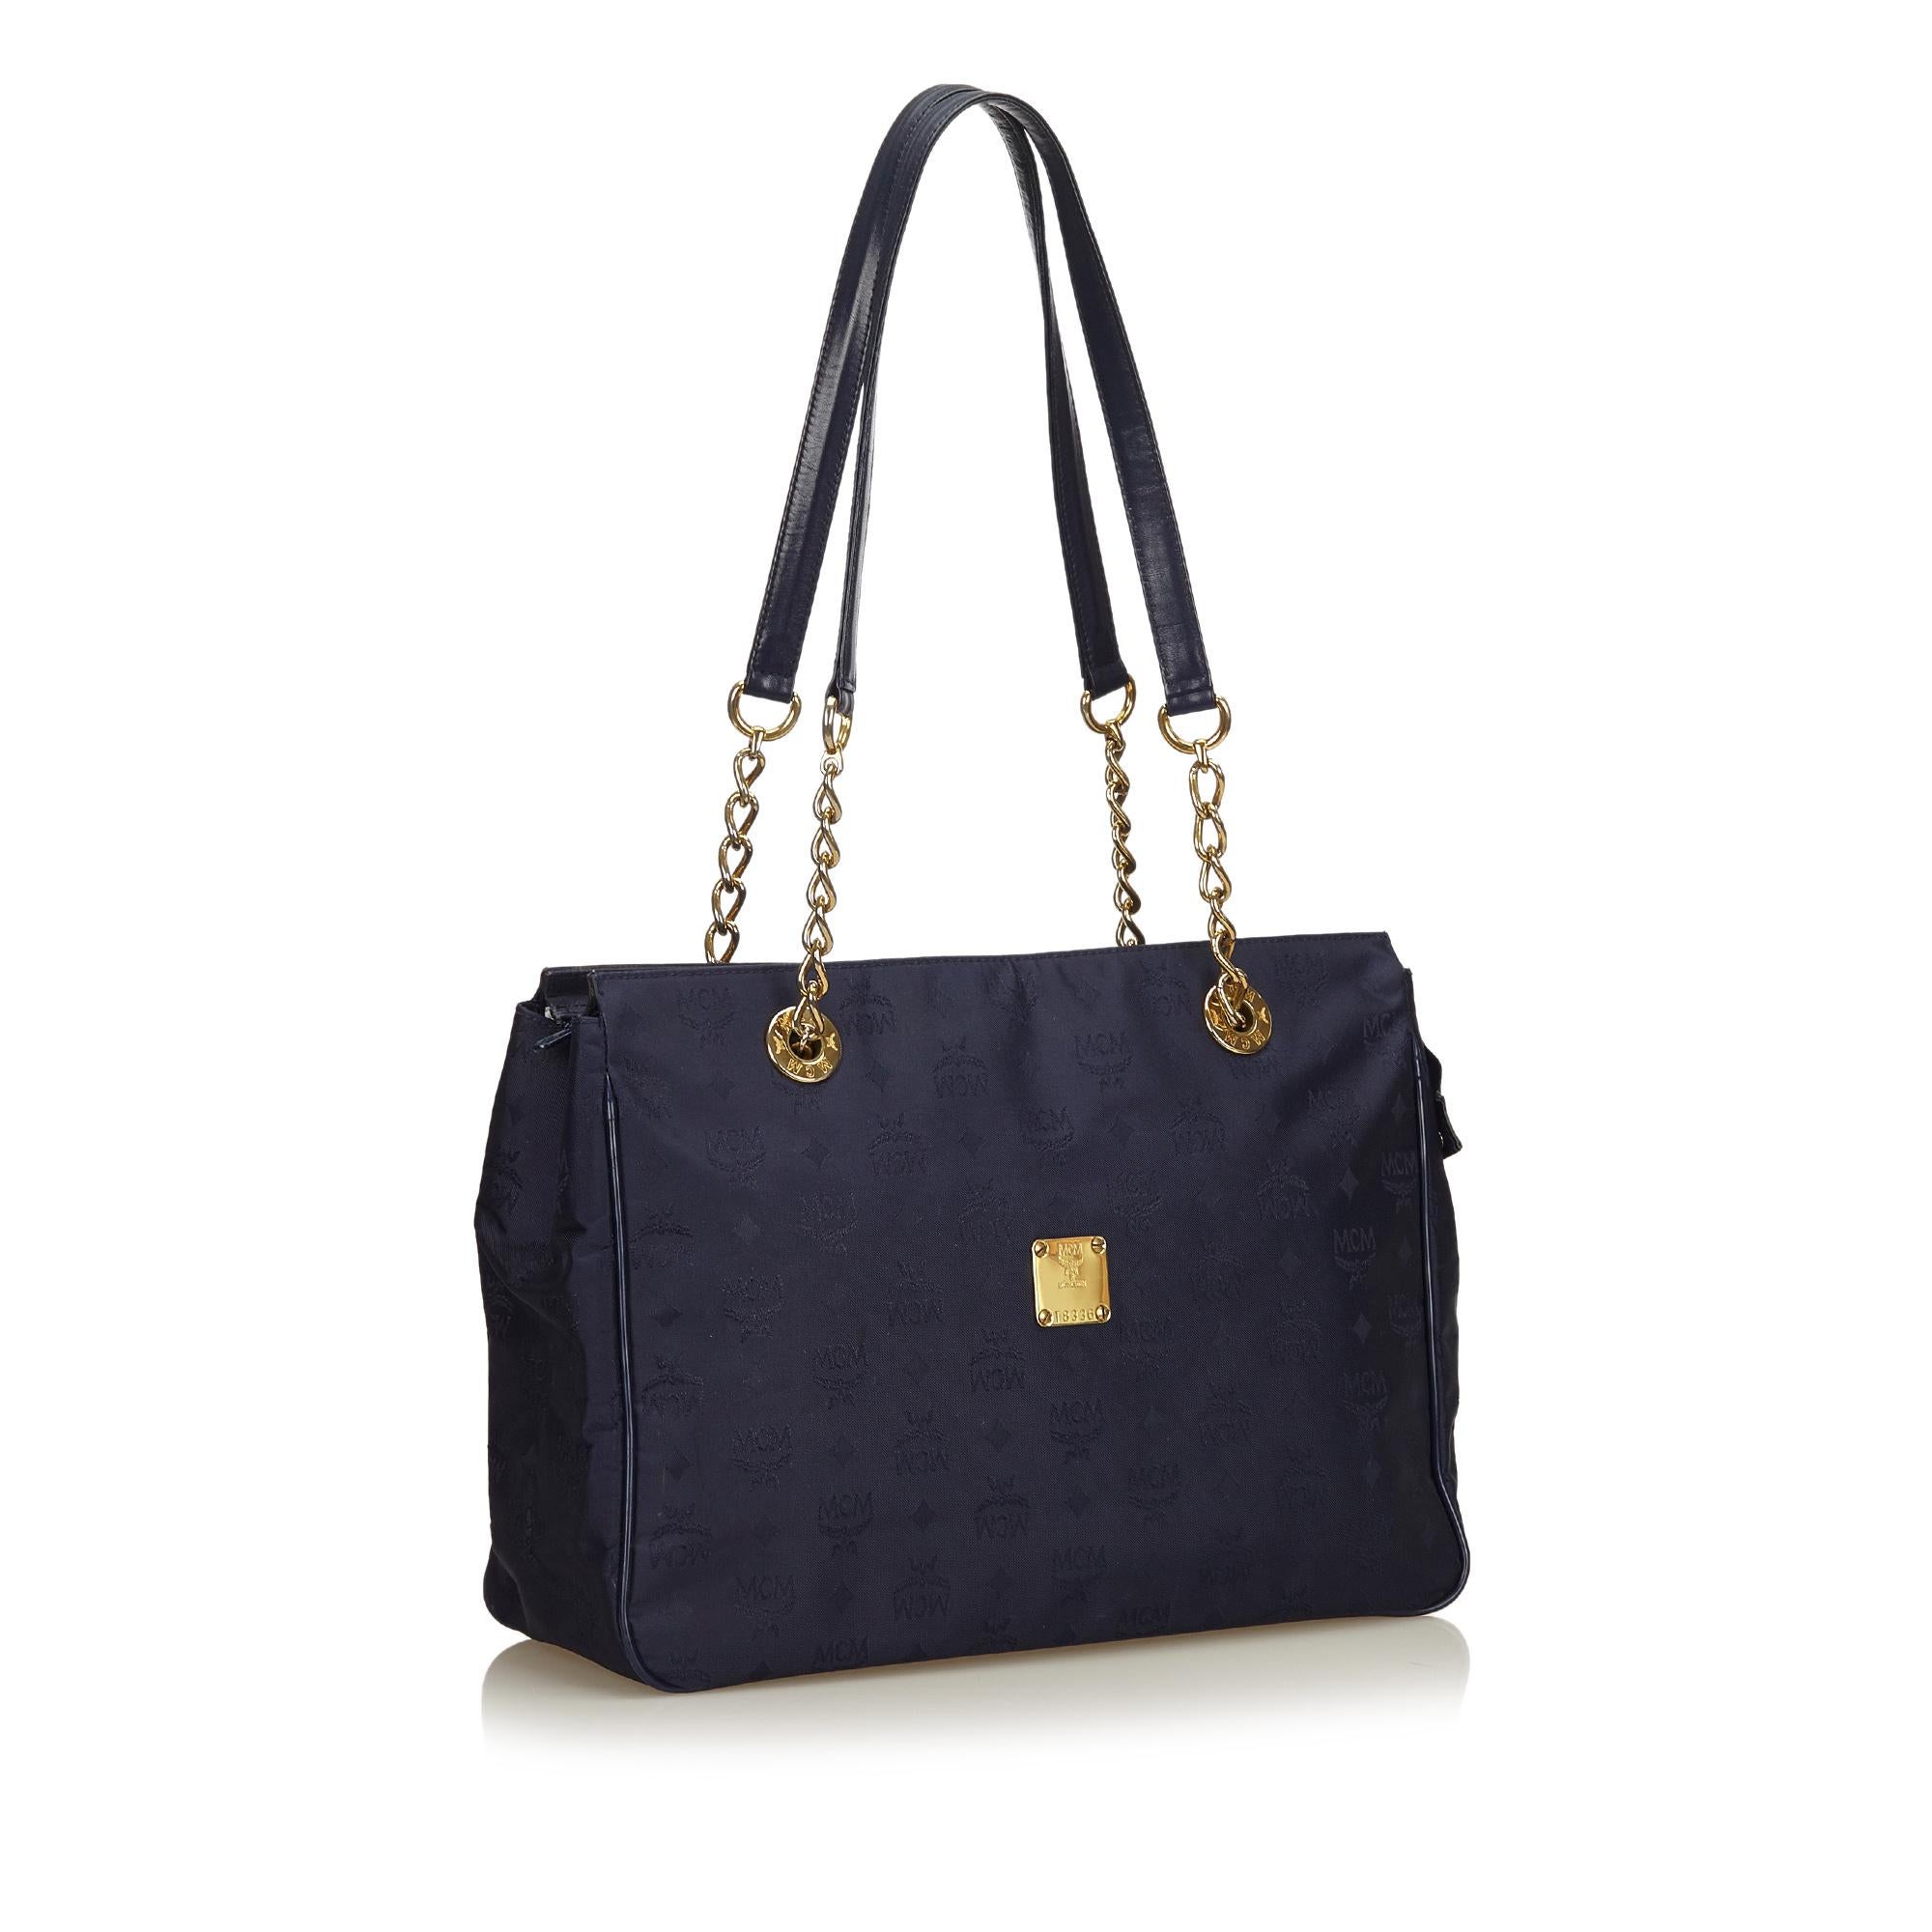 This shoulder bag features a nylon body, flat leather straps with gold-tone chains, top zip closure, and interior slip pockets. It carries as AB condition rating.

Inclusions: 
Dust Bag

Dimensions:
Length: 27.00 cm
Width: 39.00 cm
Depth: 14.00